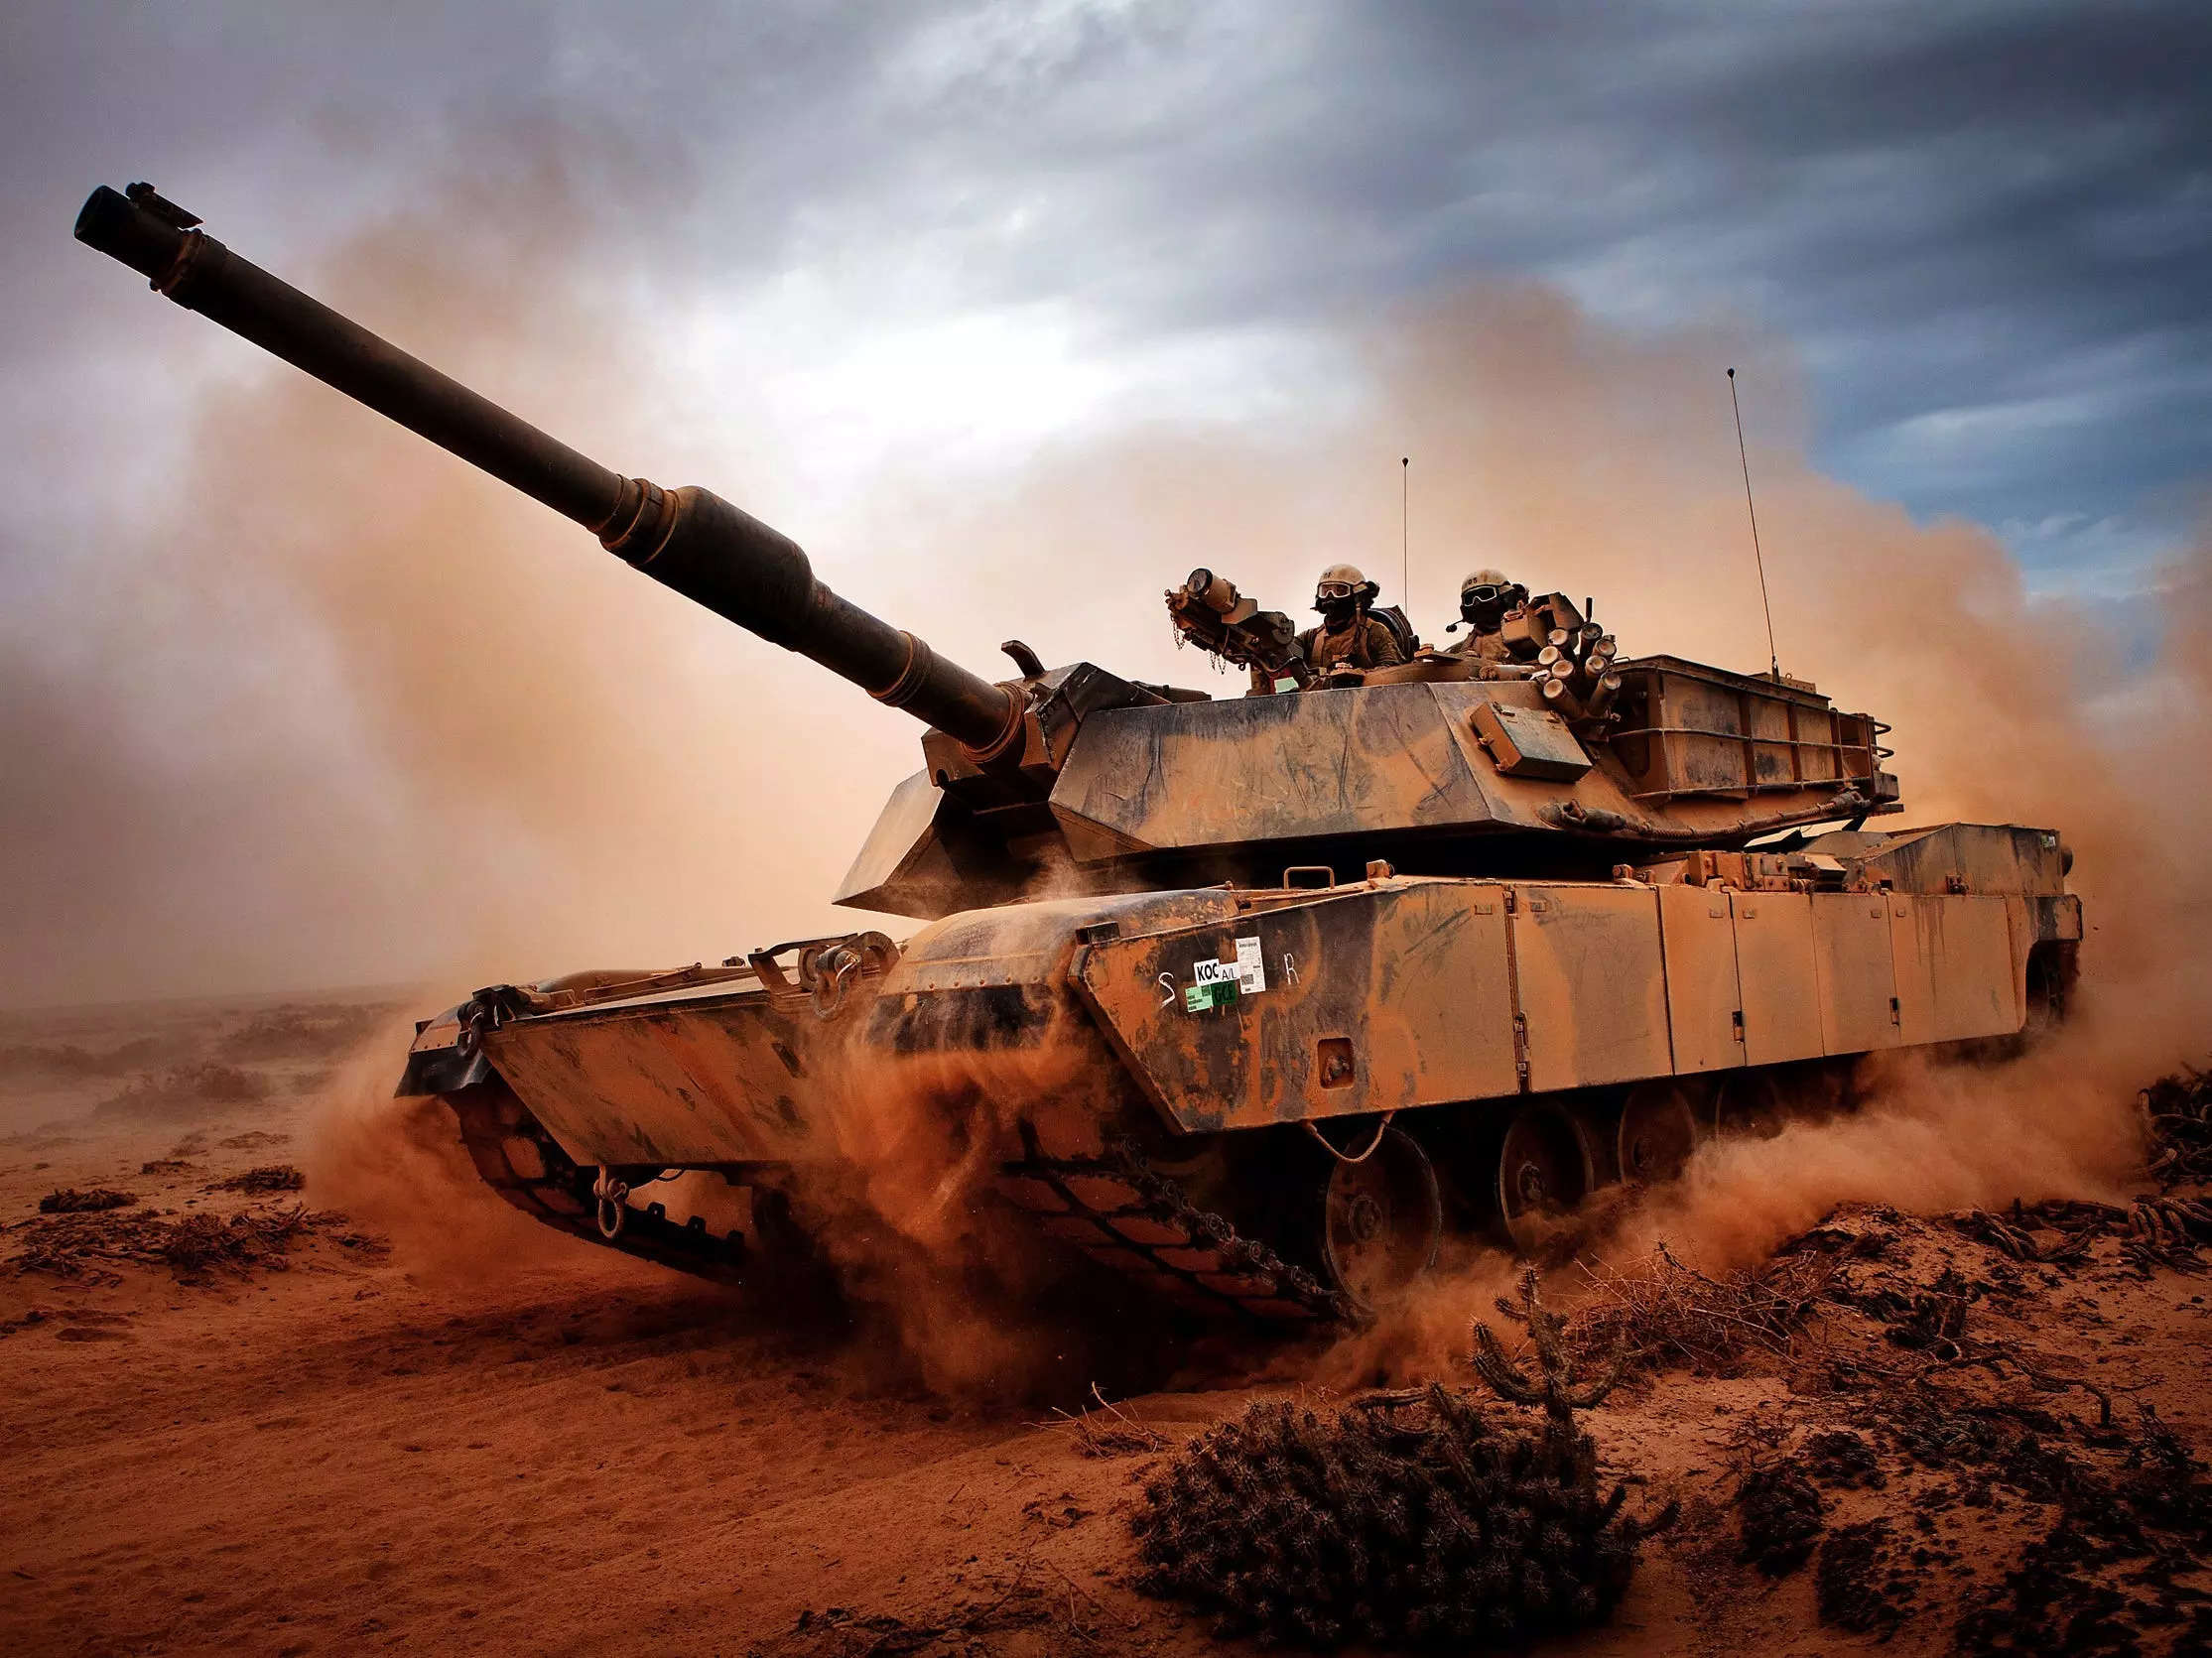 Marines from 4th Tank Division, Twentynine Palms, Calif., roll down a dirt road on their M1A1 Abrams Main Battle Tank during a day of training at Exercise Africa Lion 2012, April 13, 2012.